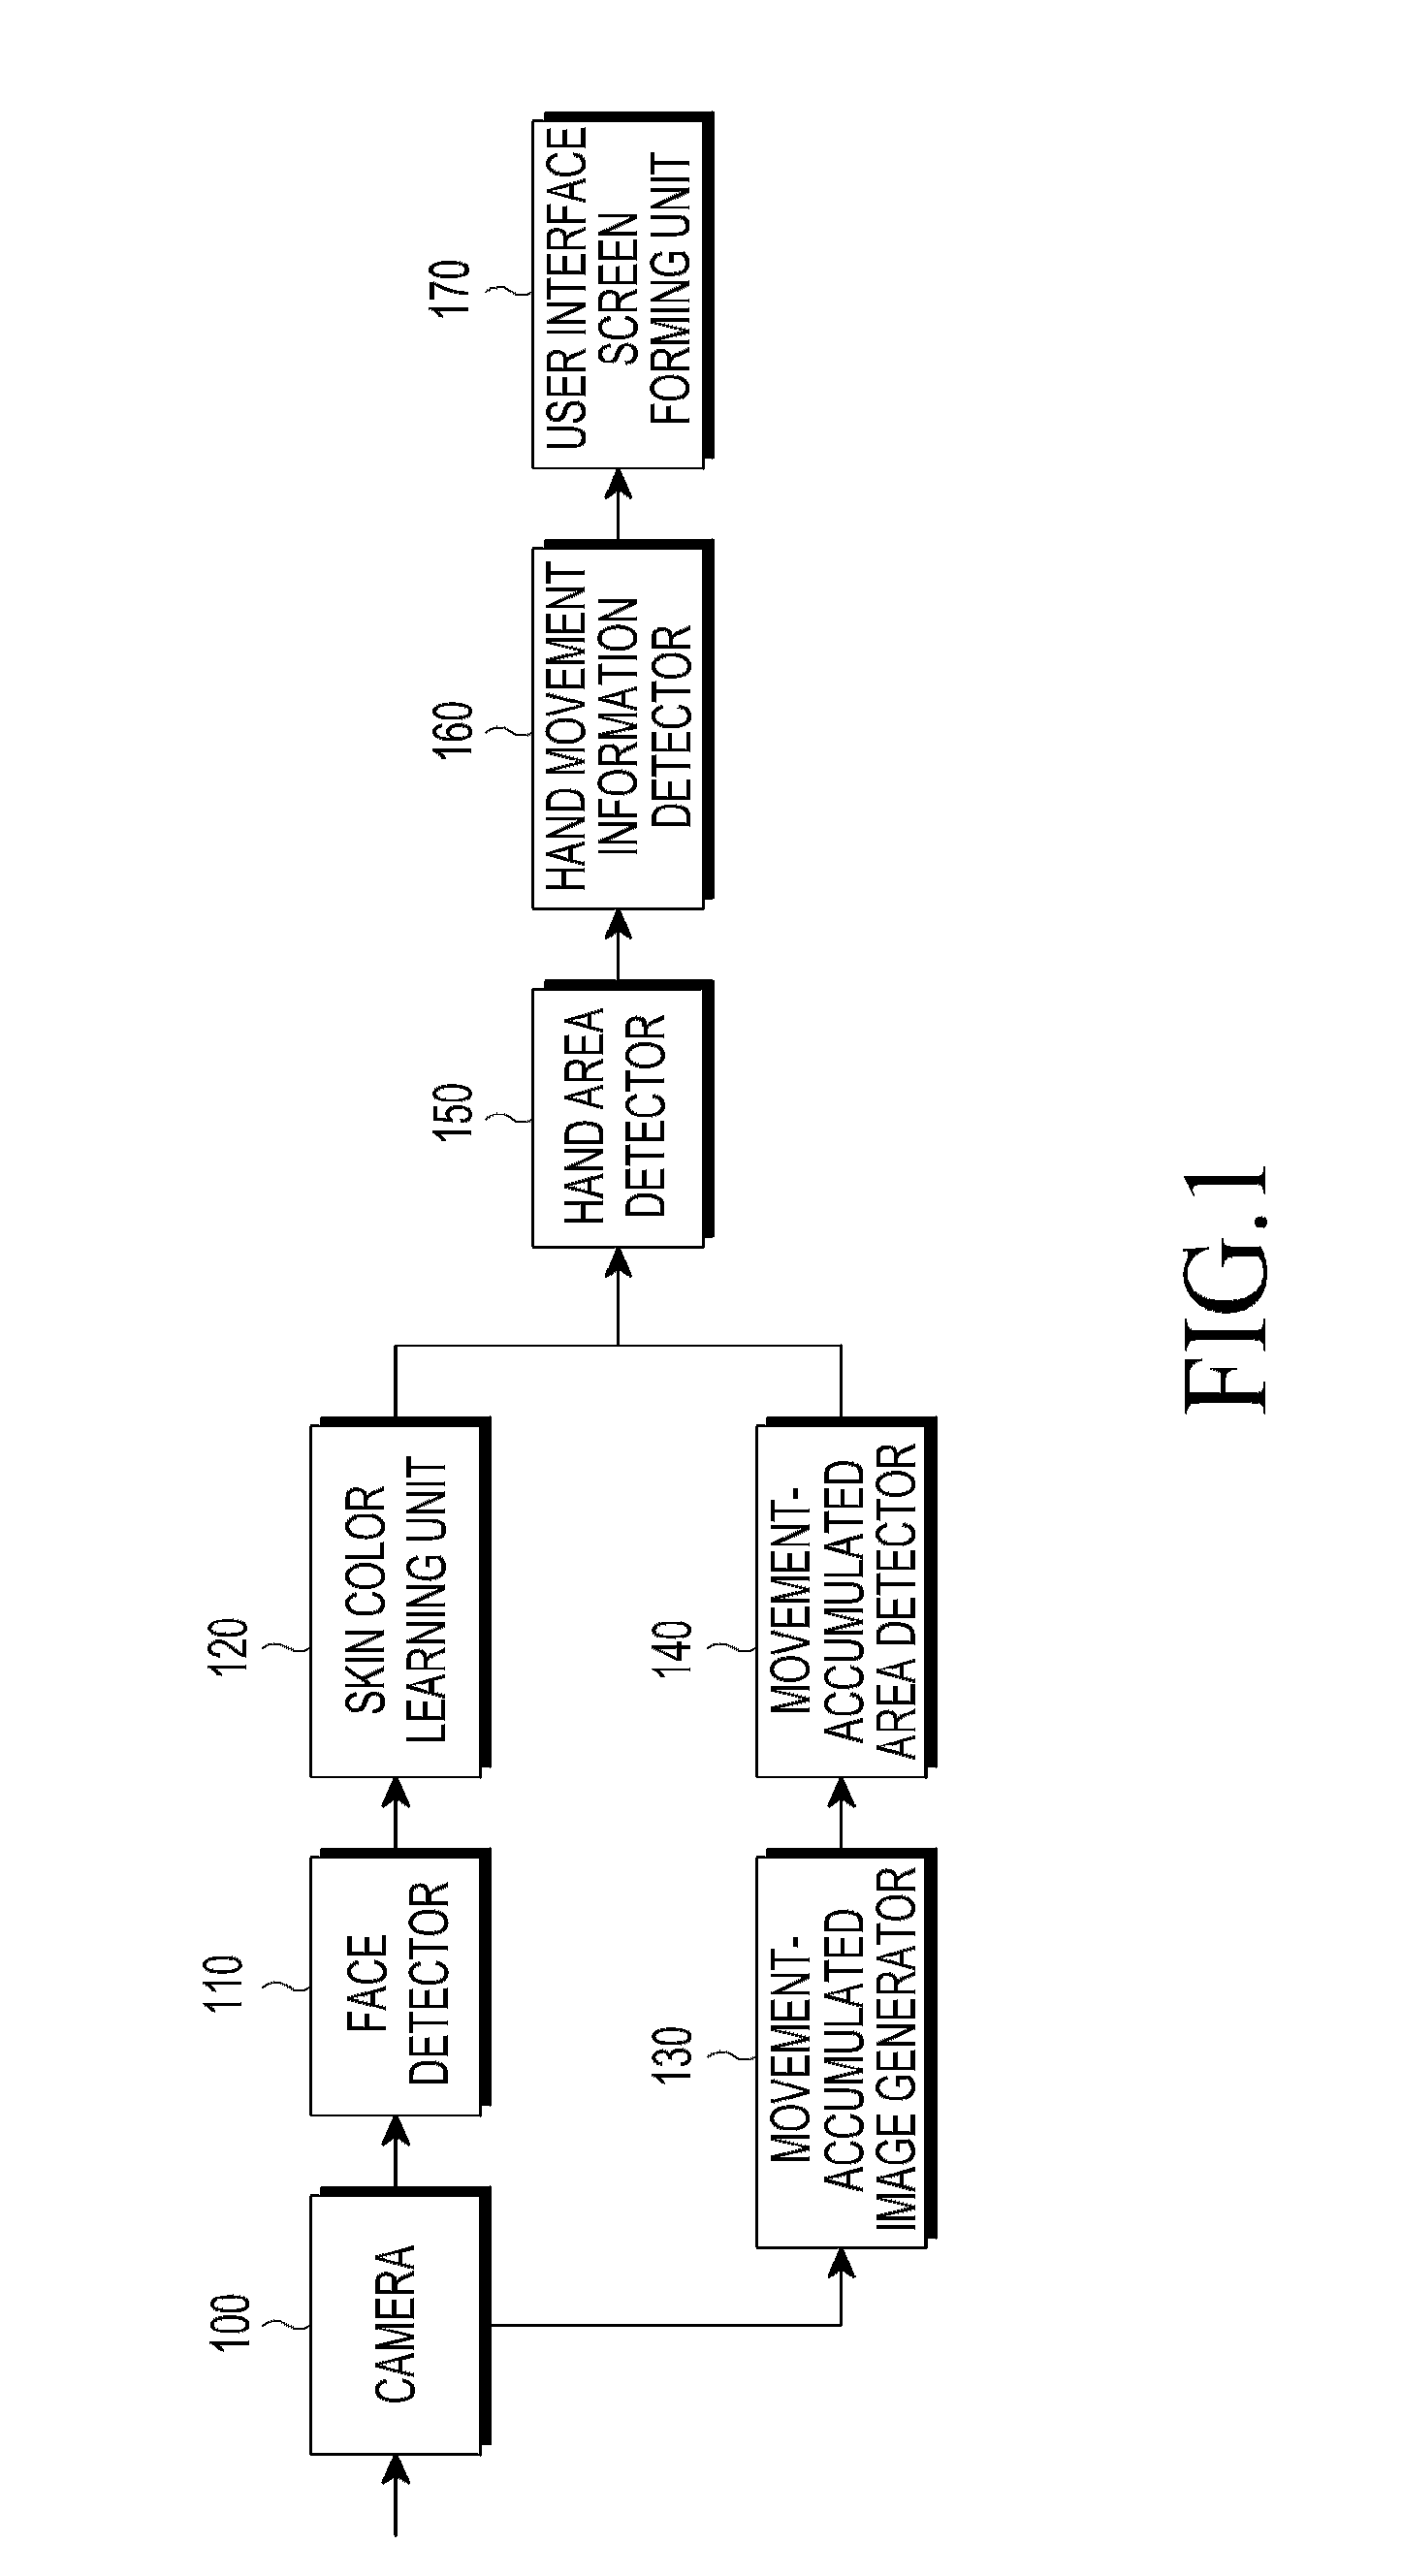 User interface apparatus and method using movement recognition